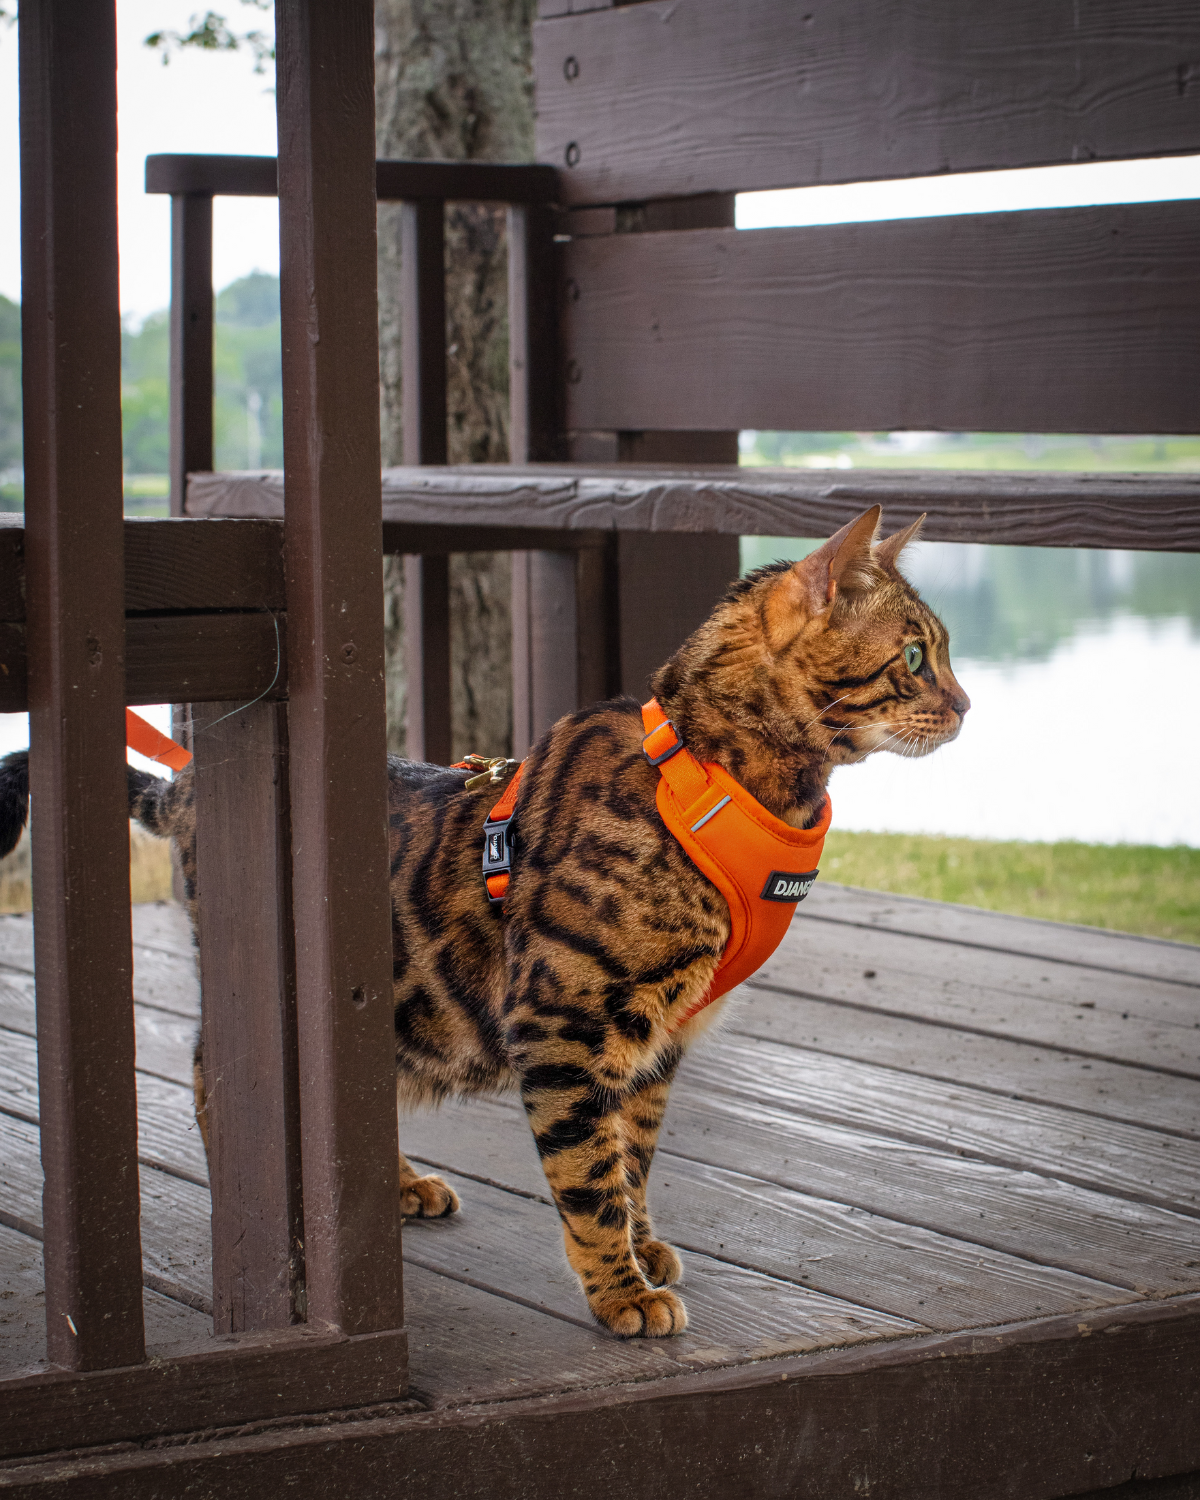 DJANGO Adventure Cat Harness in Sunset Orange - Loki is a Bengal cat and adventure cat and wears size small in DJANGO Adventure Cat Harnesses. DJANGO harnesses feature a padded and lightweight body, soft custom webbing for max comfort, a breathable sport mesh lining, reflective piping, and a beautiful solid cast brass D-ring. - djangobrand.com